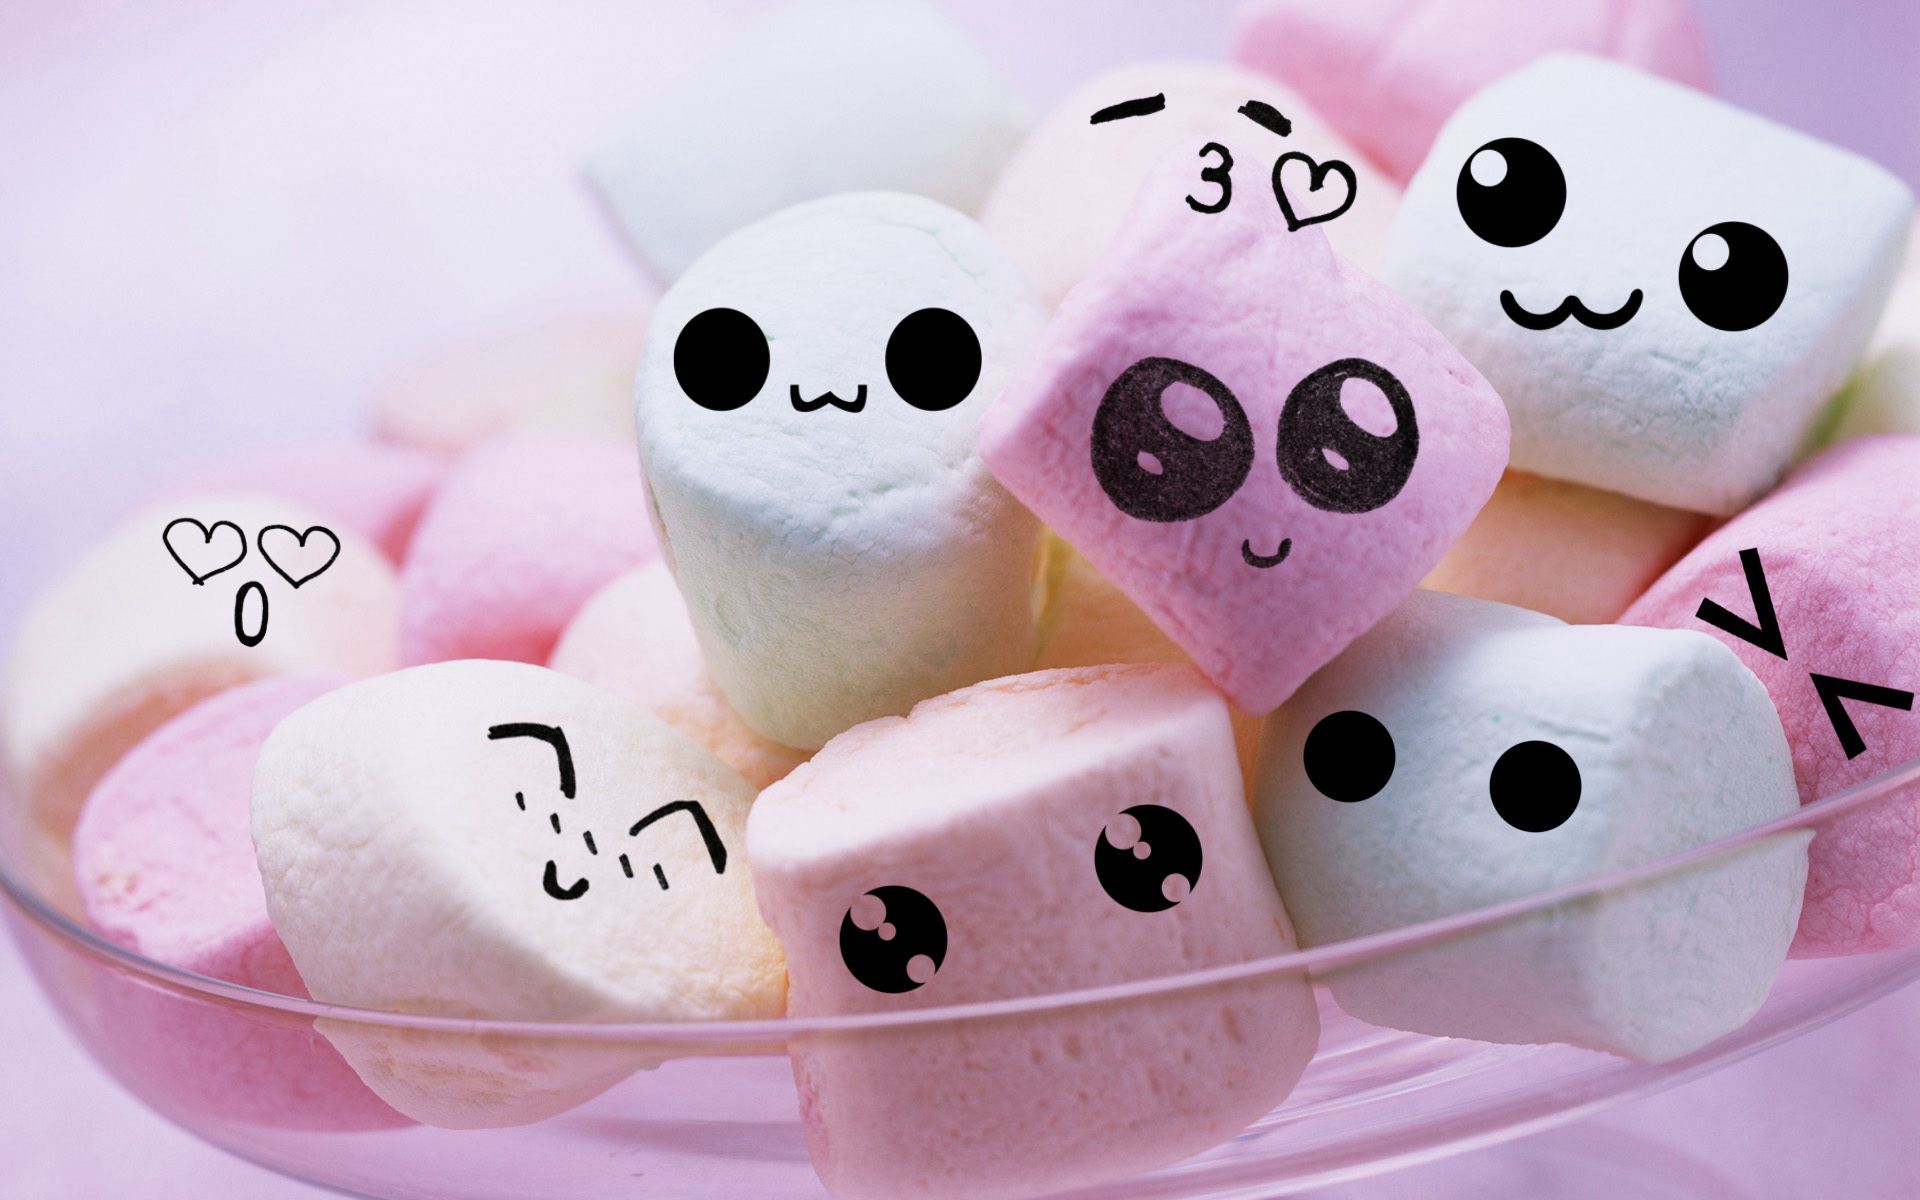 CHAMALLOW. Cute marshmallows, Marshmallow image, Cute image for wallpaper